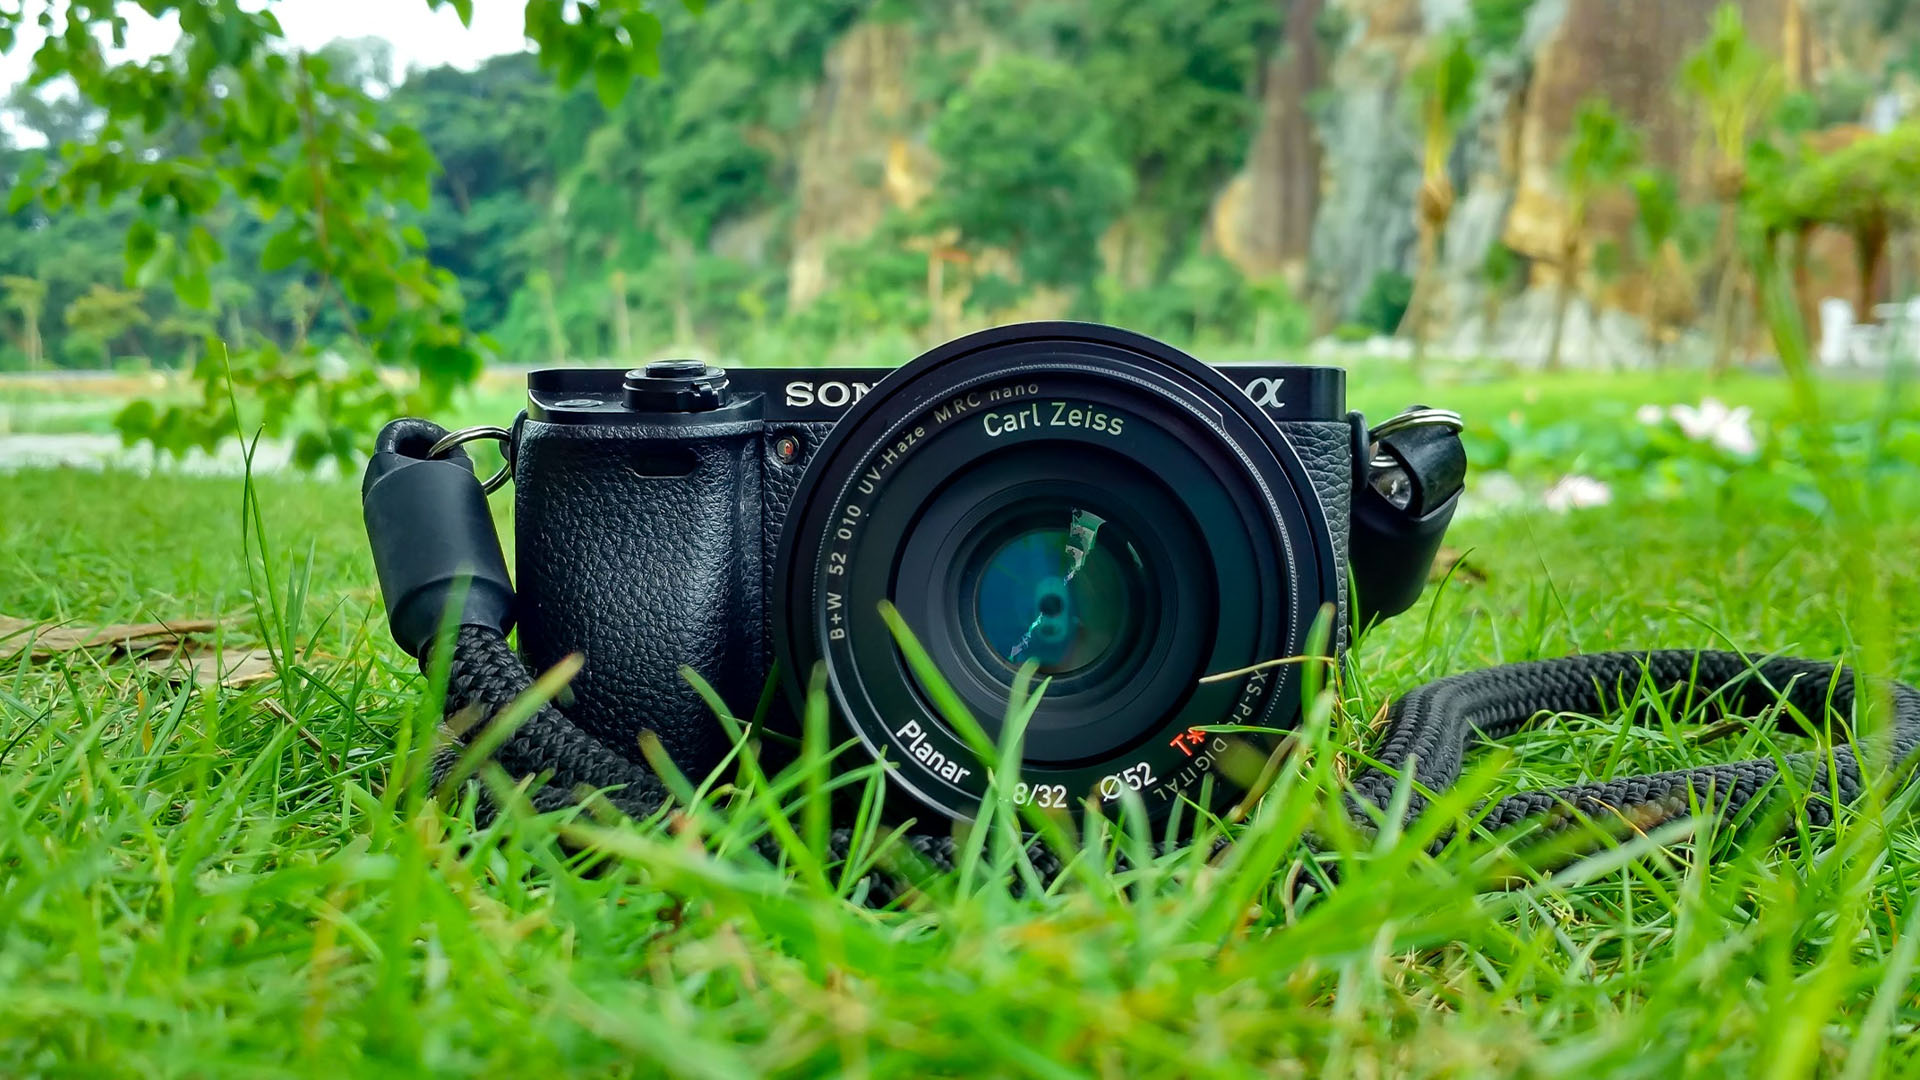 Creative image of a camera in the grass.